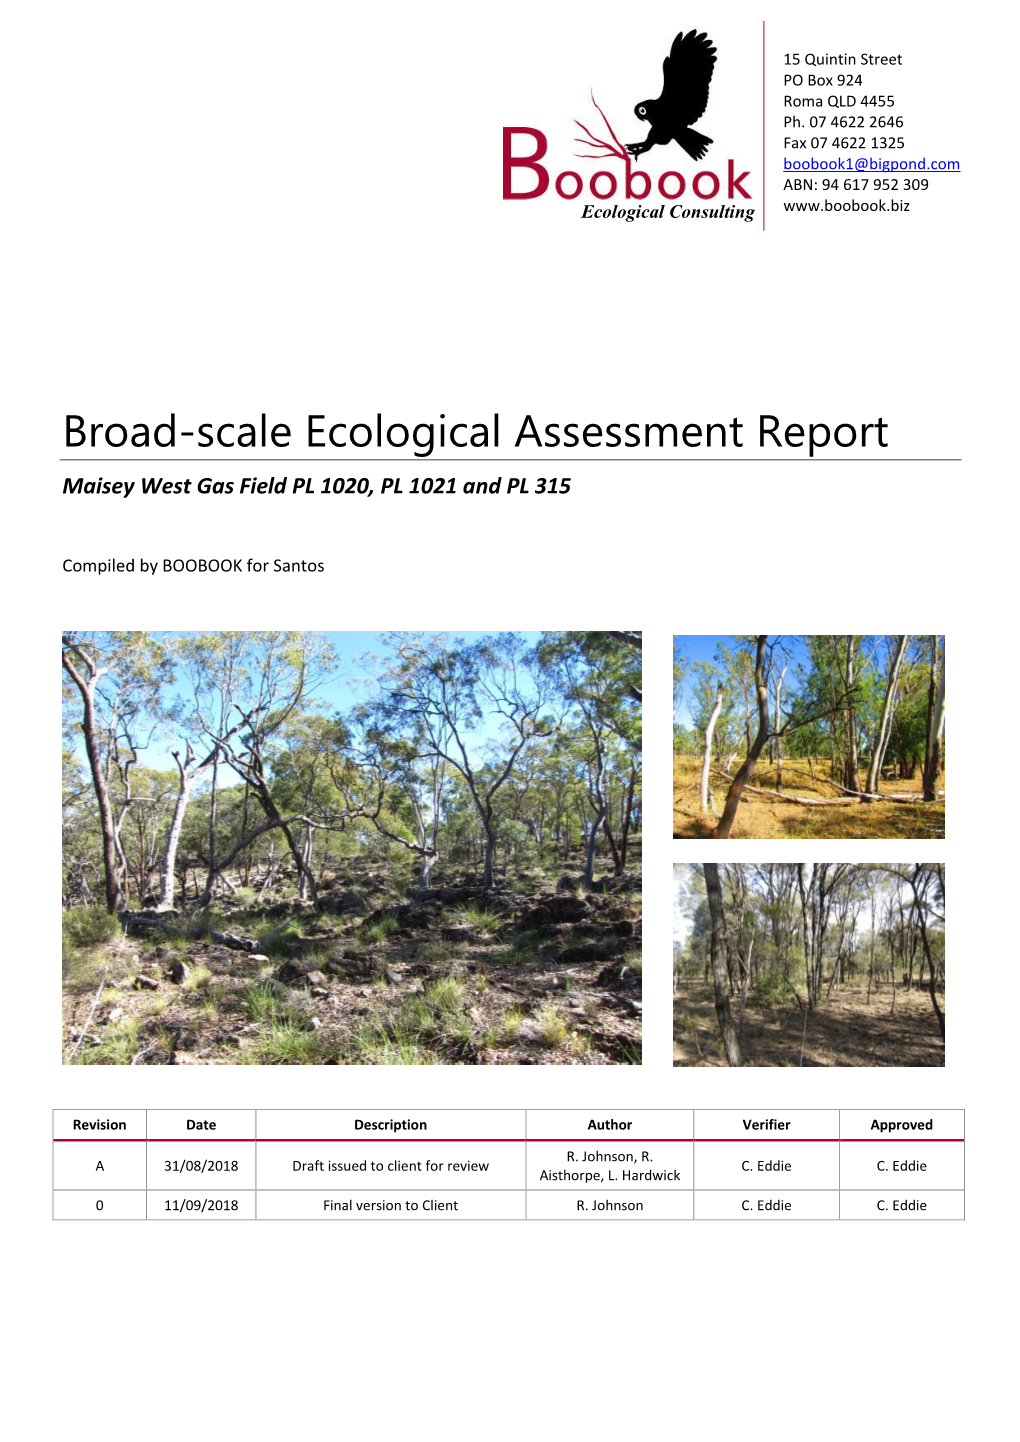 Broad-Scale Ecological Assessment Report Maisey West Gas Field PL 1020, PL 1021 and PL 315